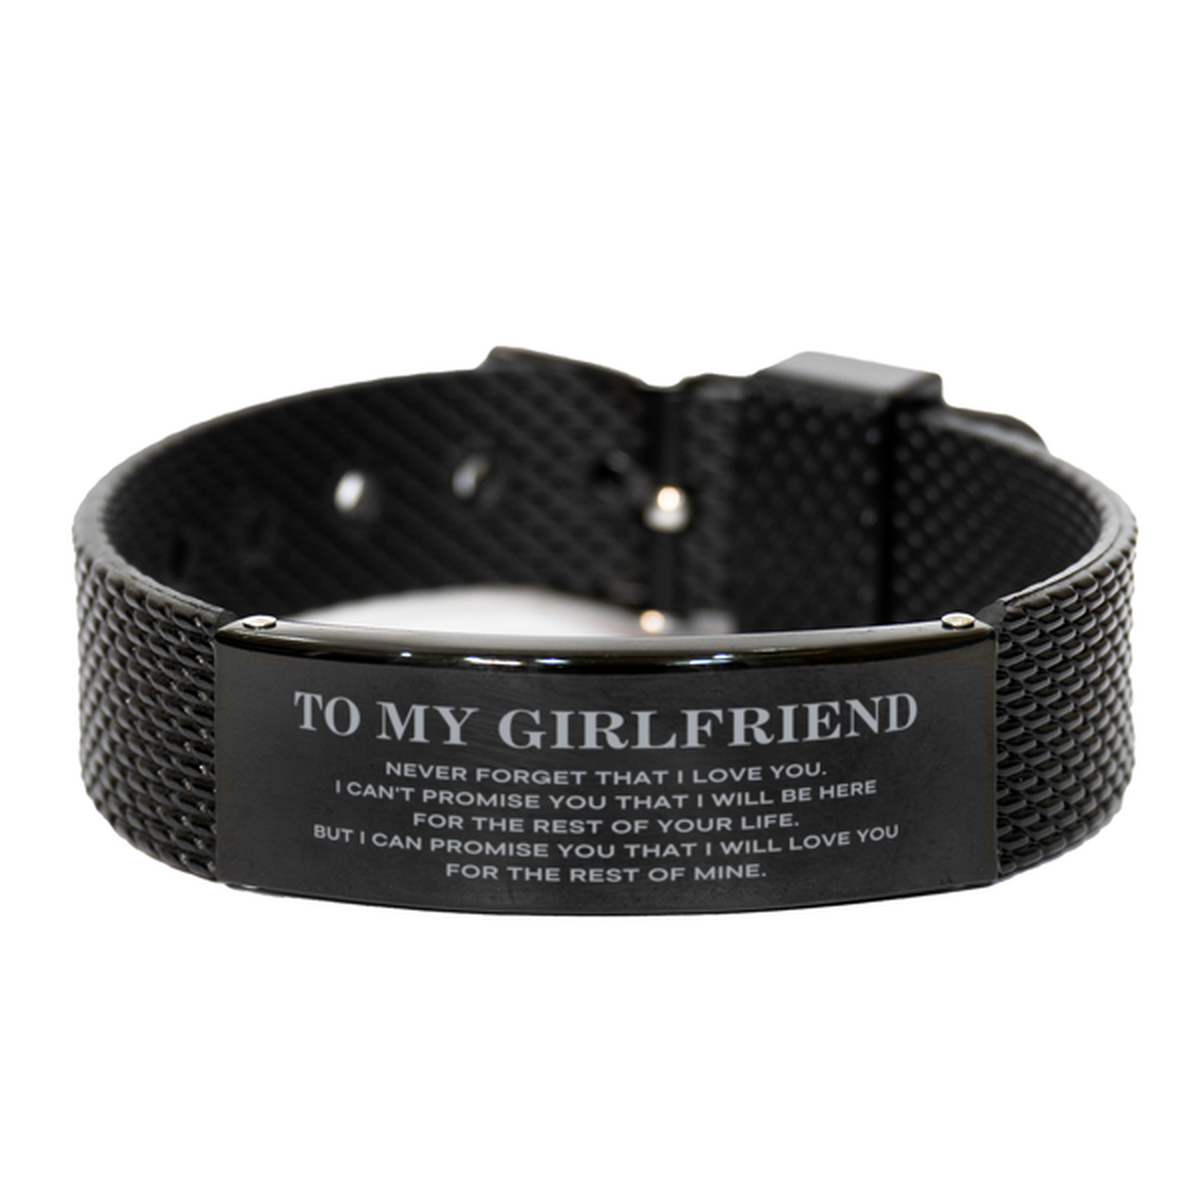 To My Girlfriend Gifts, I will love you for the rest of mine, Love Girlfriend Bracelet, Birthday Christmas Unique Black Shark Mesh Bracelet For Girlfriend